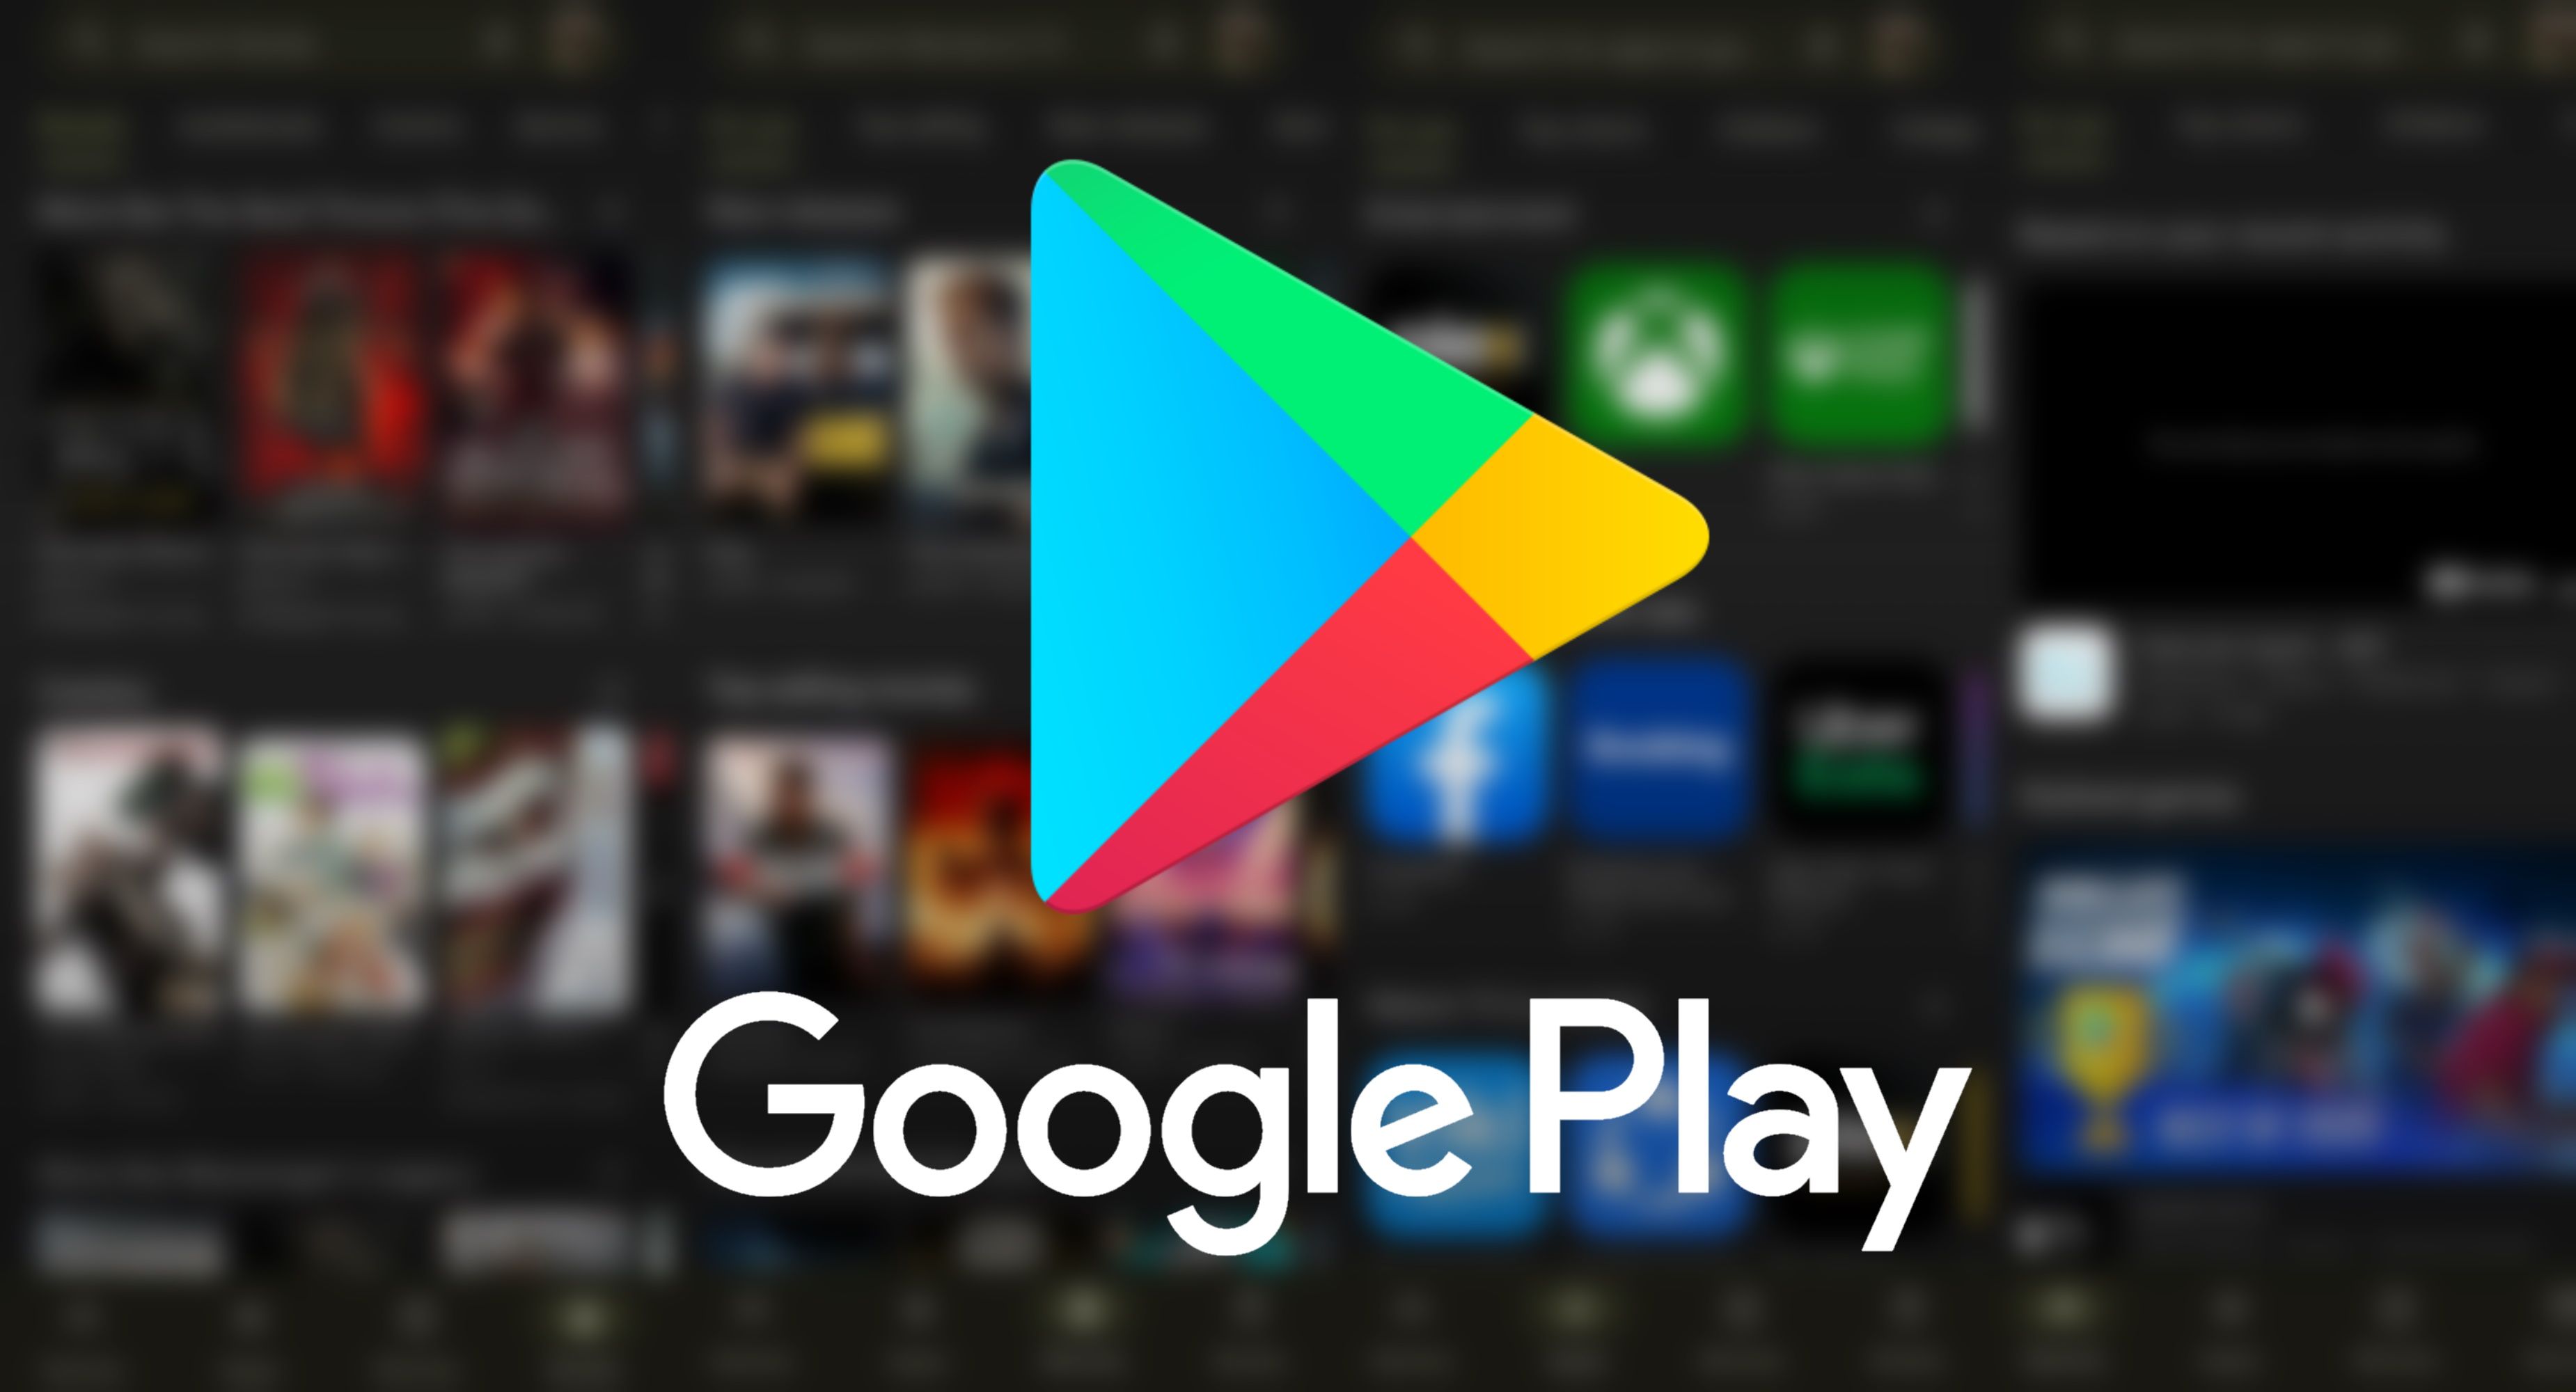 The Google Play Store's logo redesign has come for your notifications